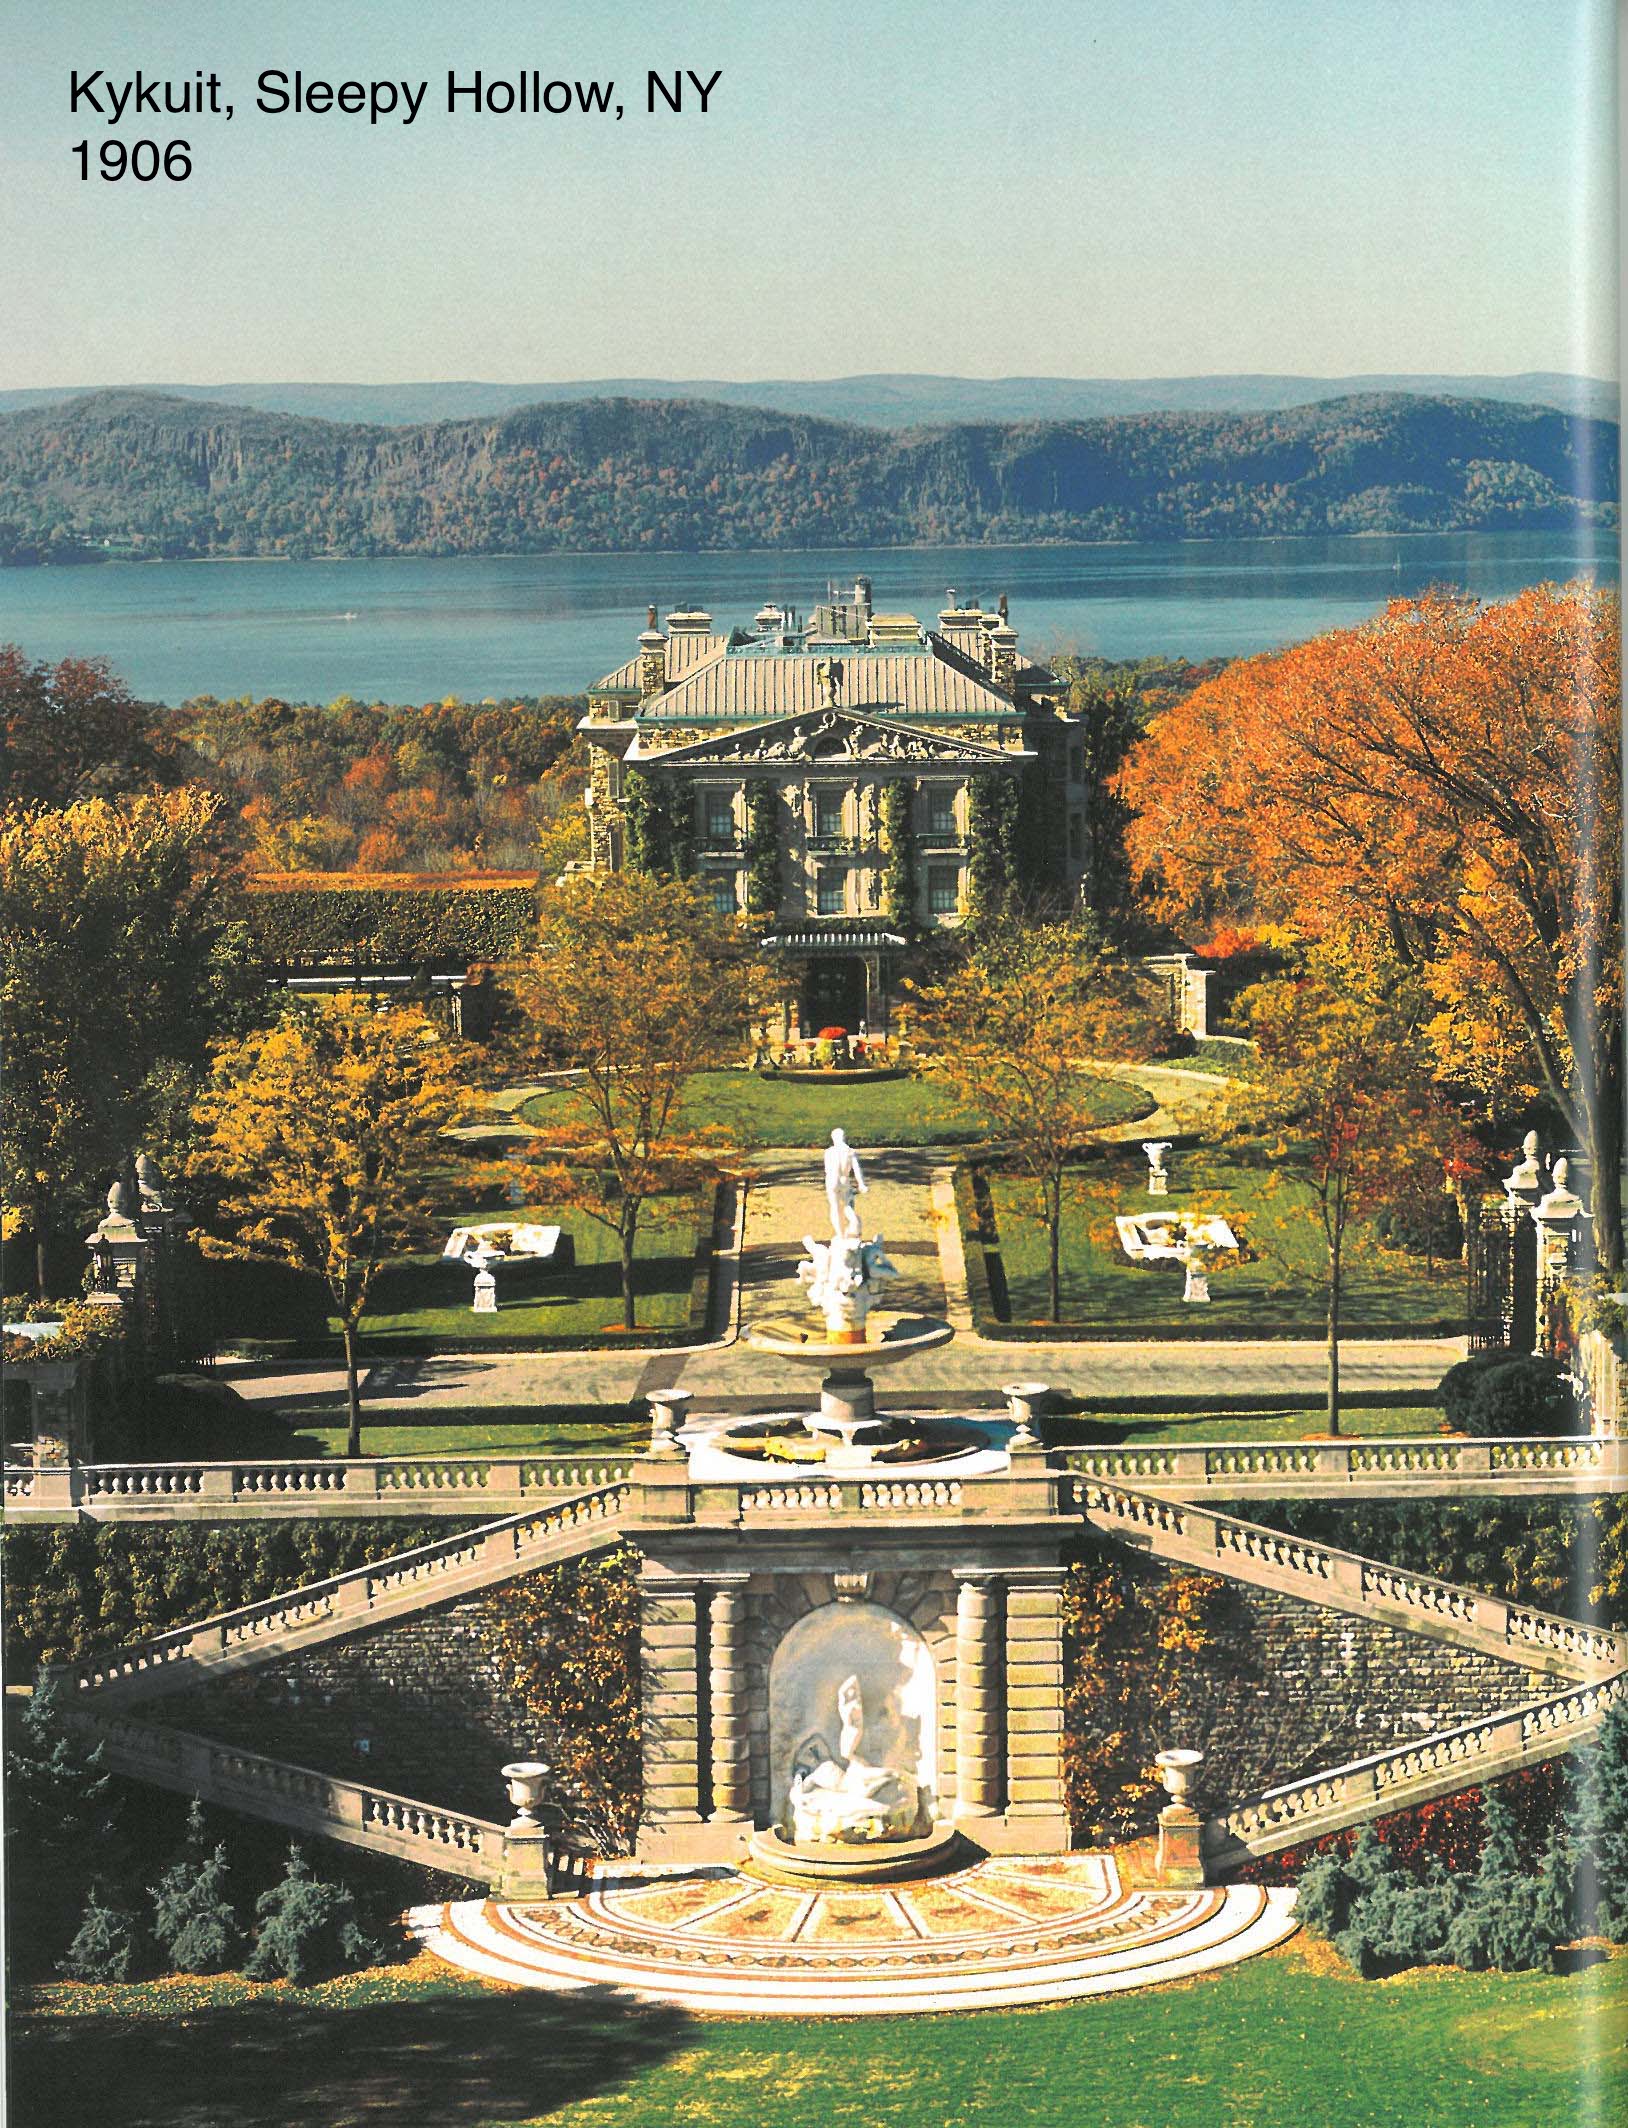 Kykuit. Image courtesy of the Historic Hudson Valley Press